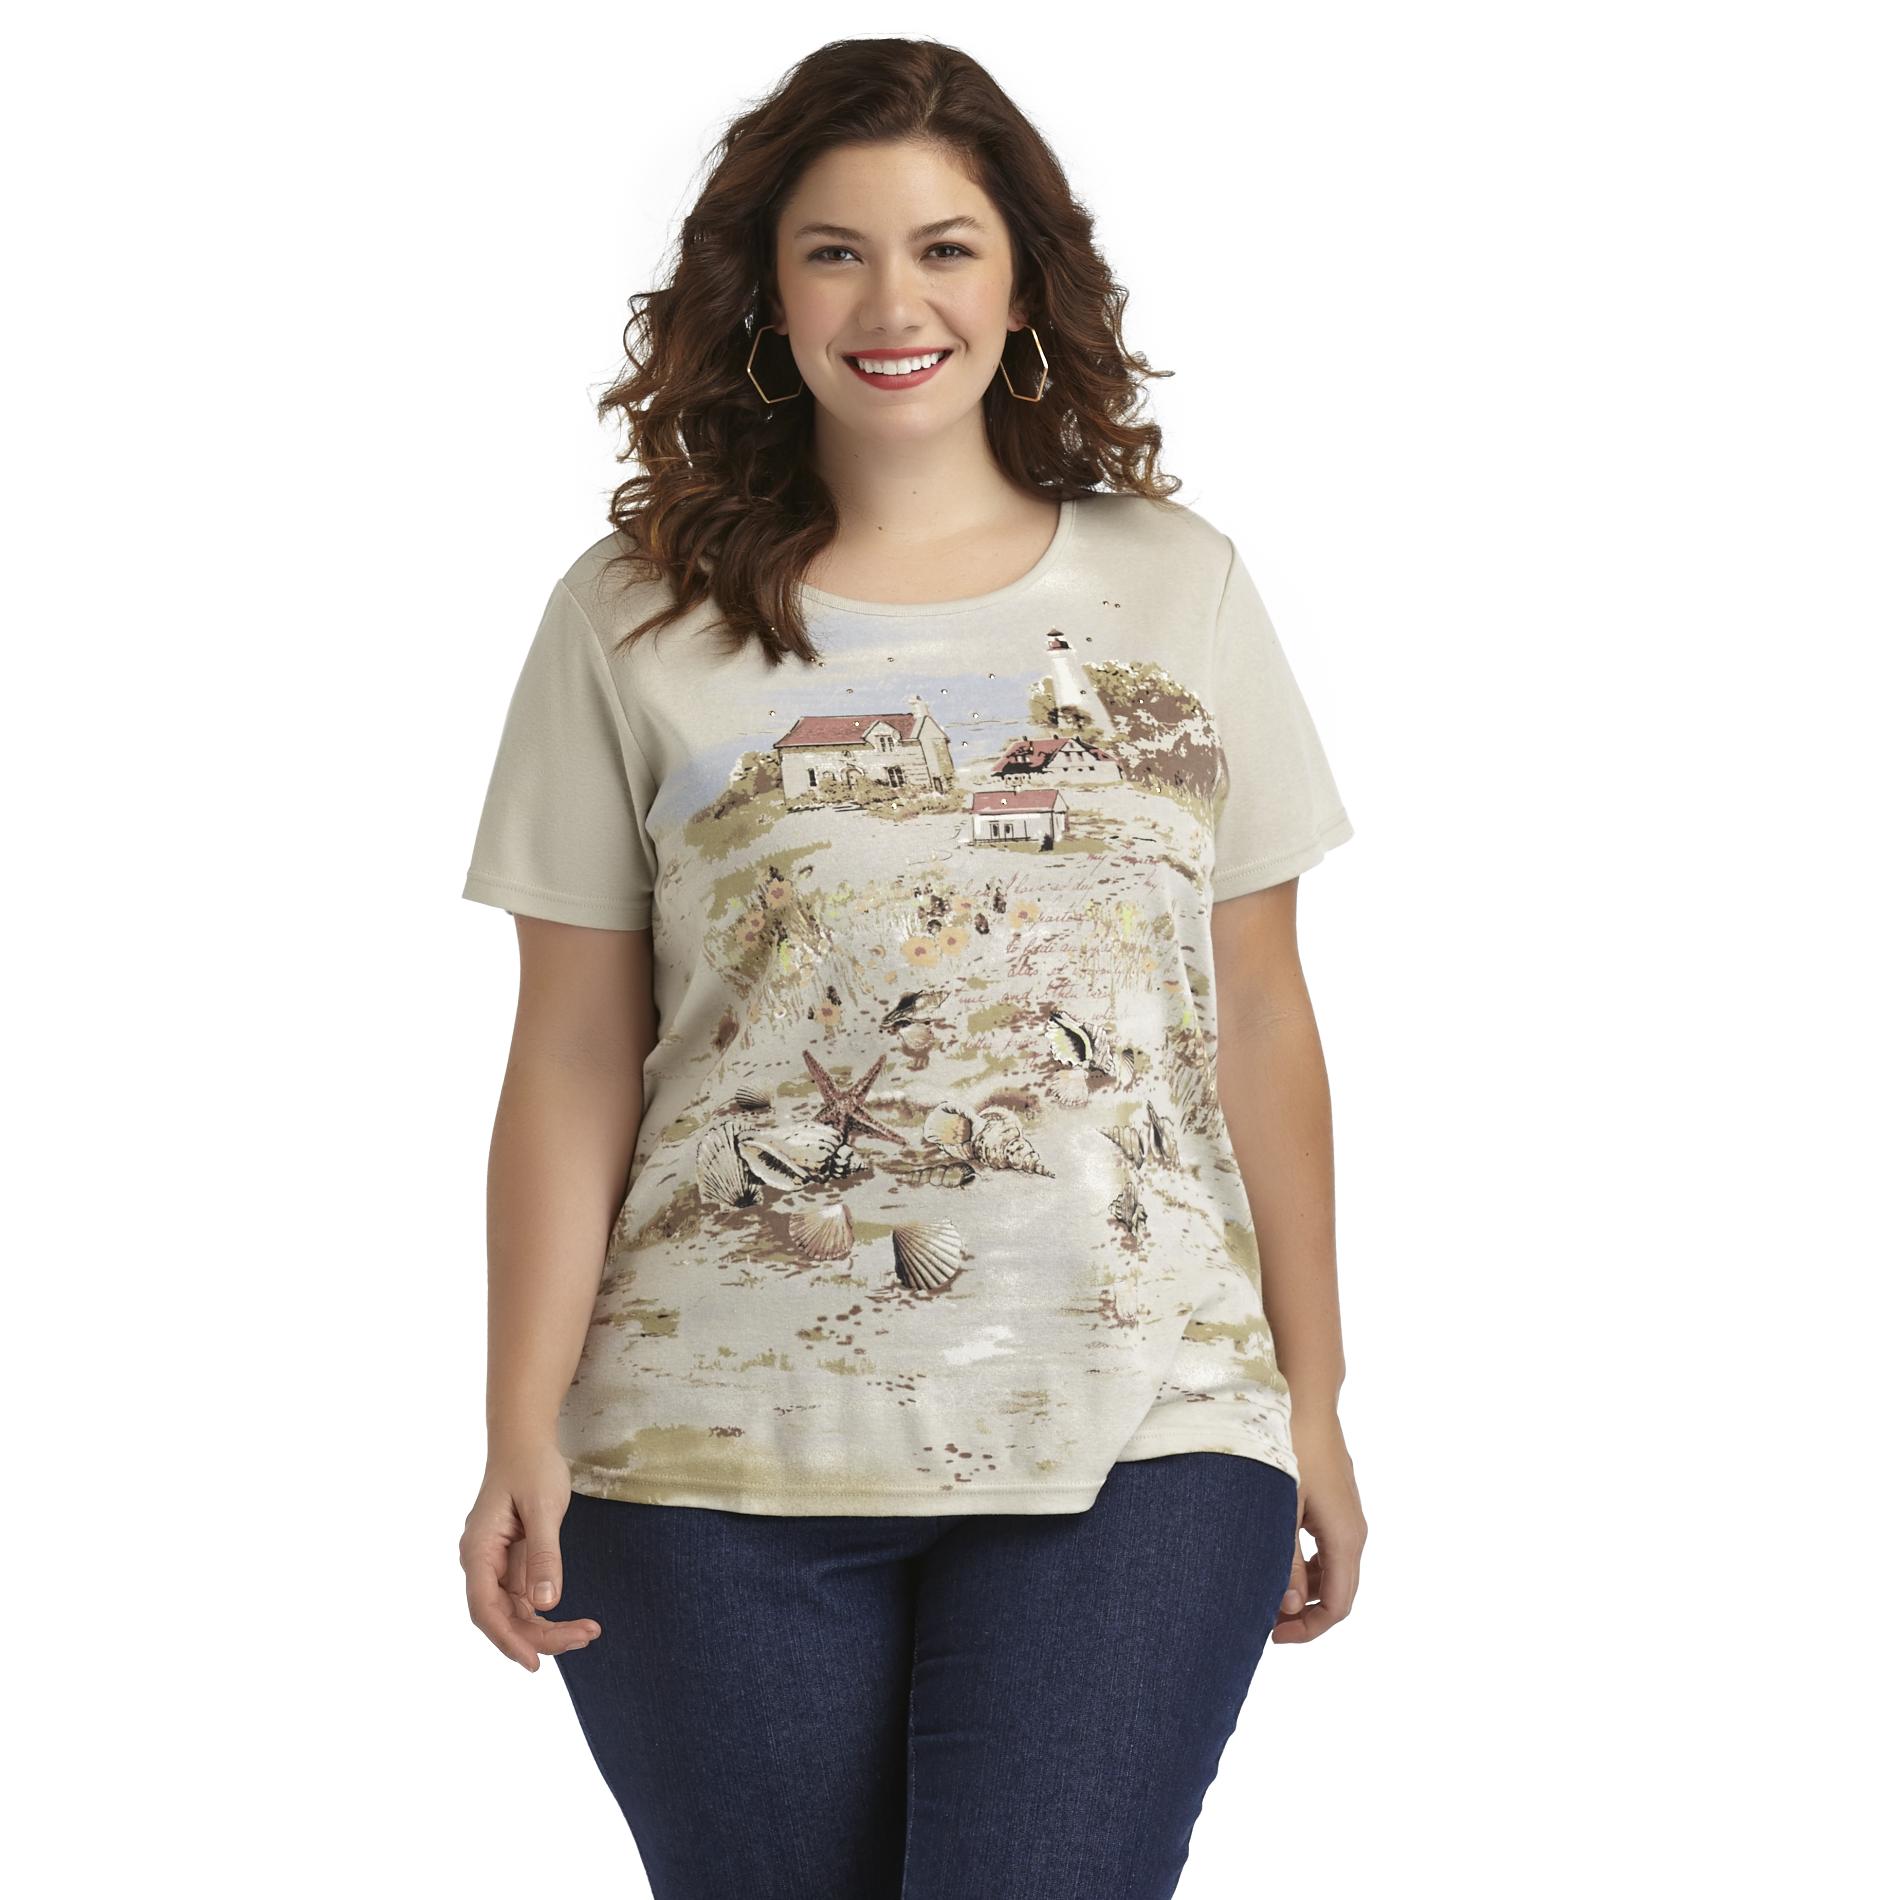 Basic Editions Women's Plus Short-Sleeve Graphic Top - Lighthouse